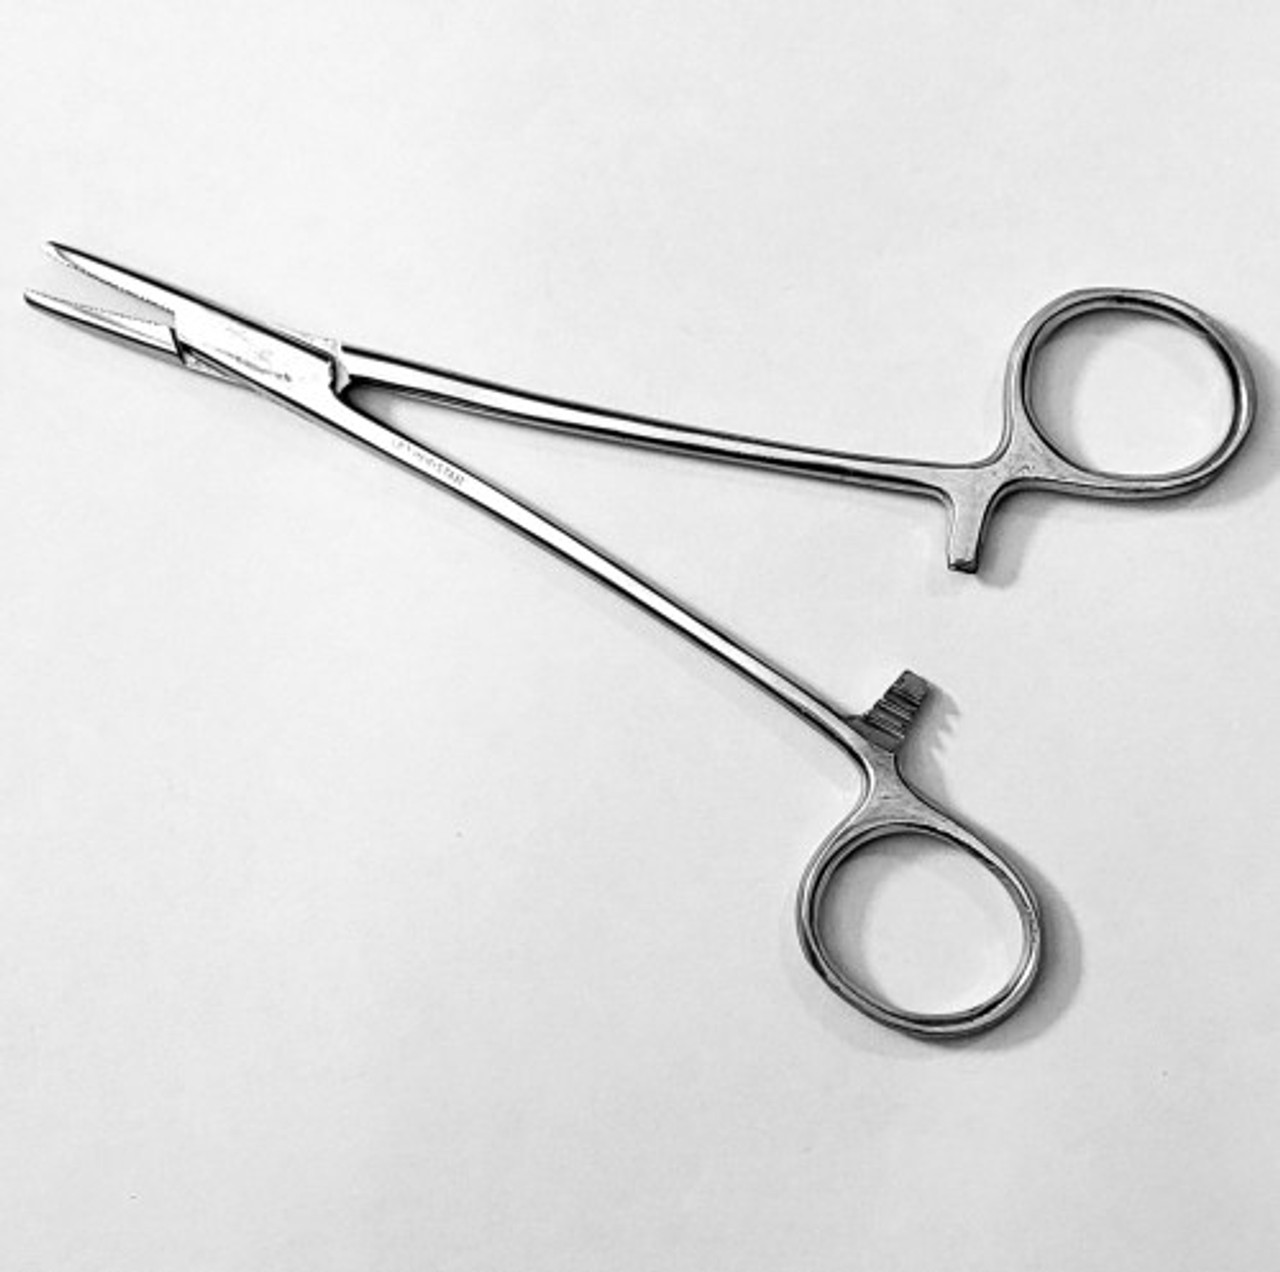 STAINLESS STEEL CURVED TIP 5-1/2 HEMOSTAT